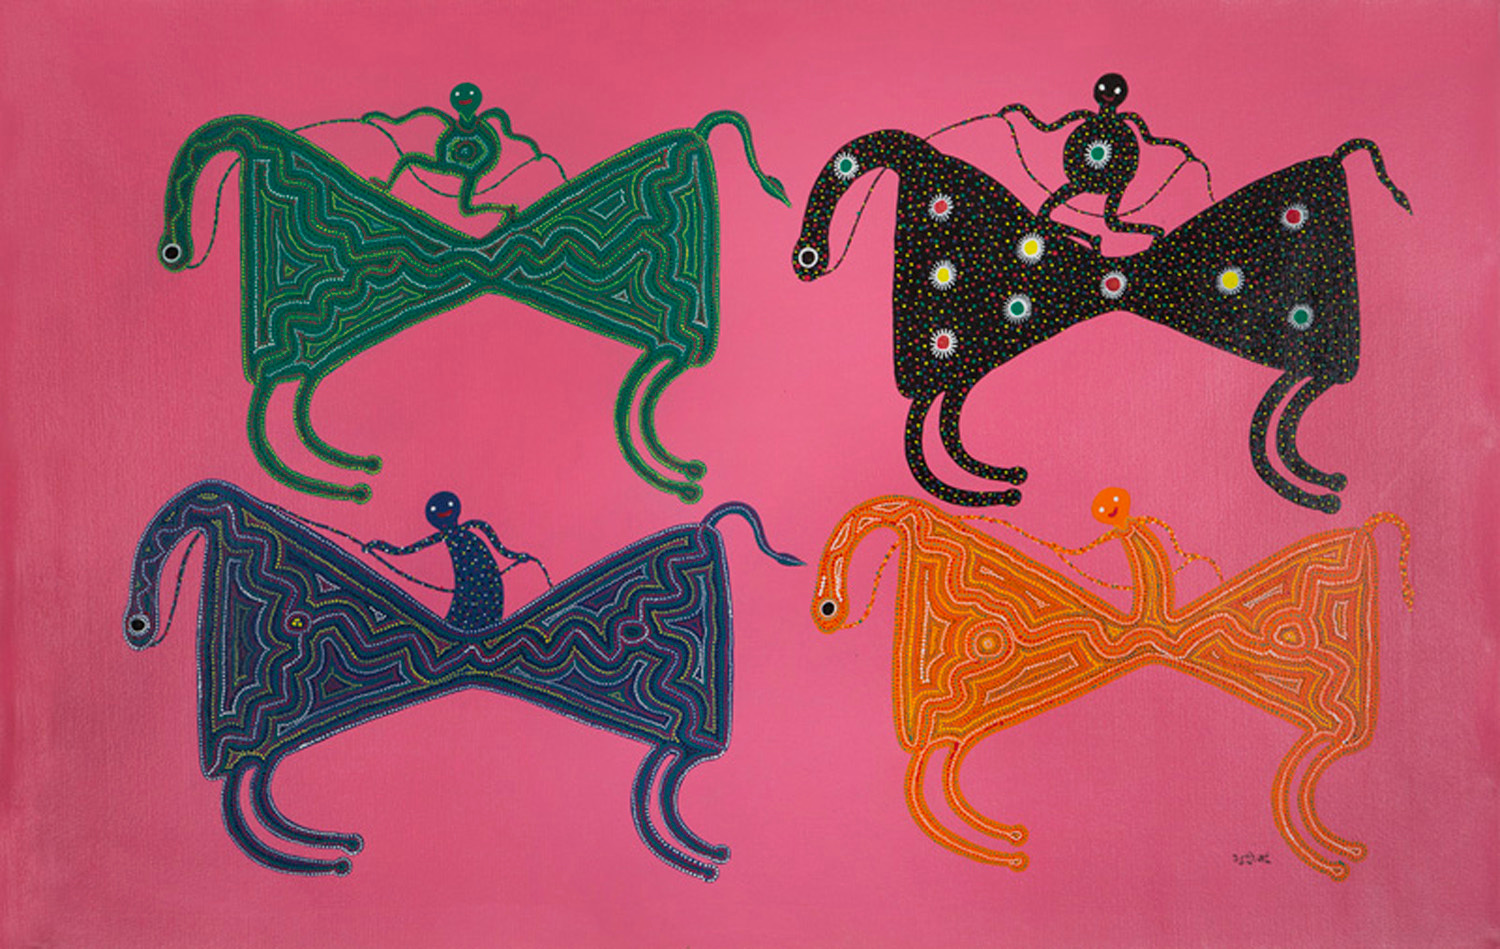 A work by Bhuri Bai, one of the Indian female artists whose work is featured on MAP's website.